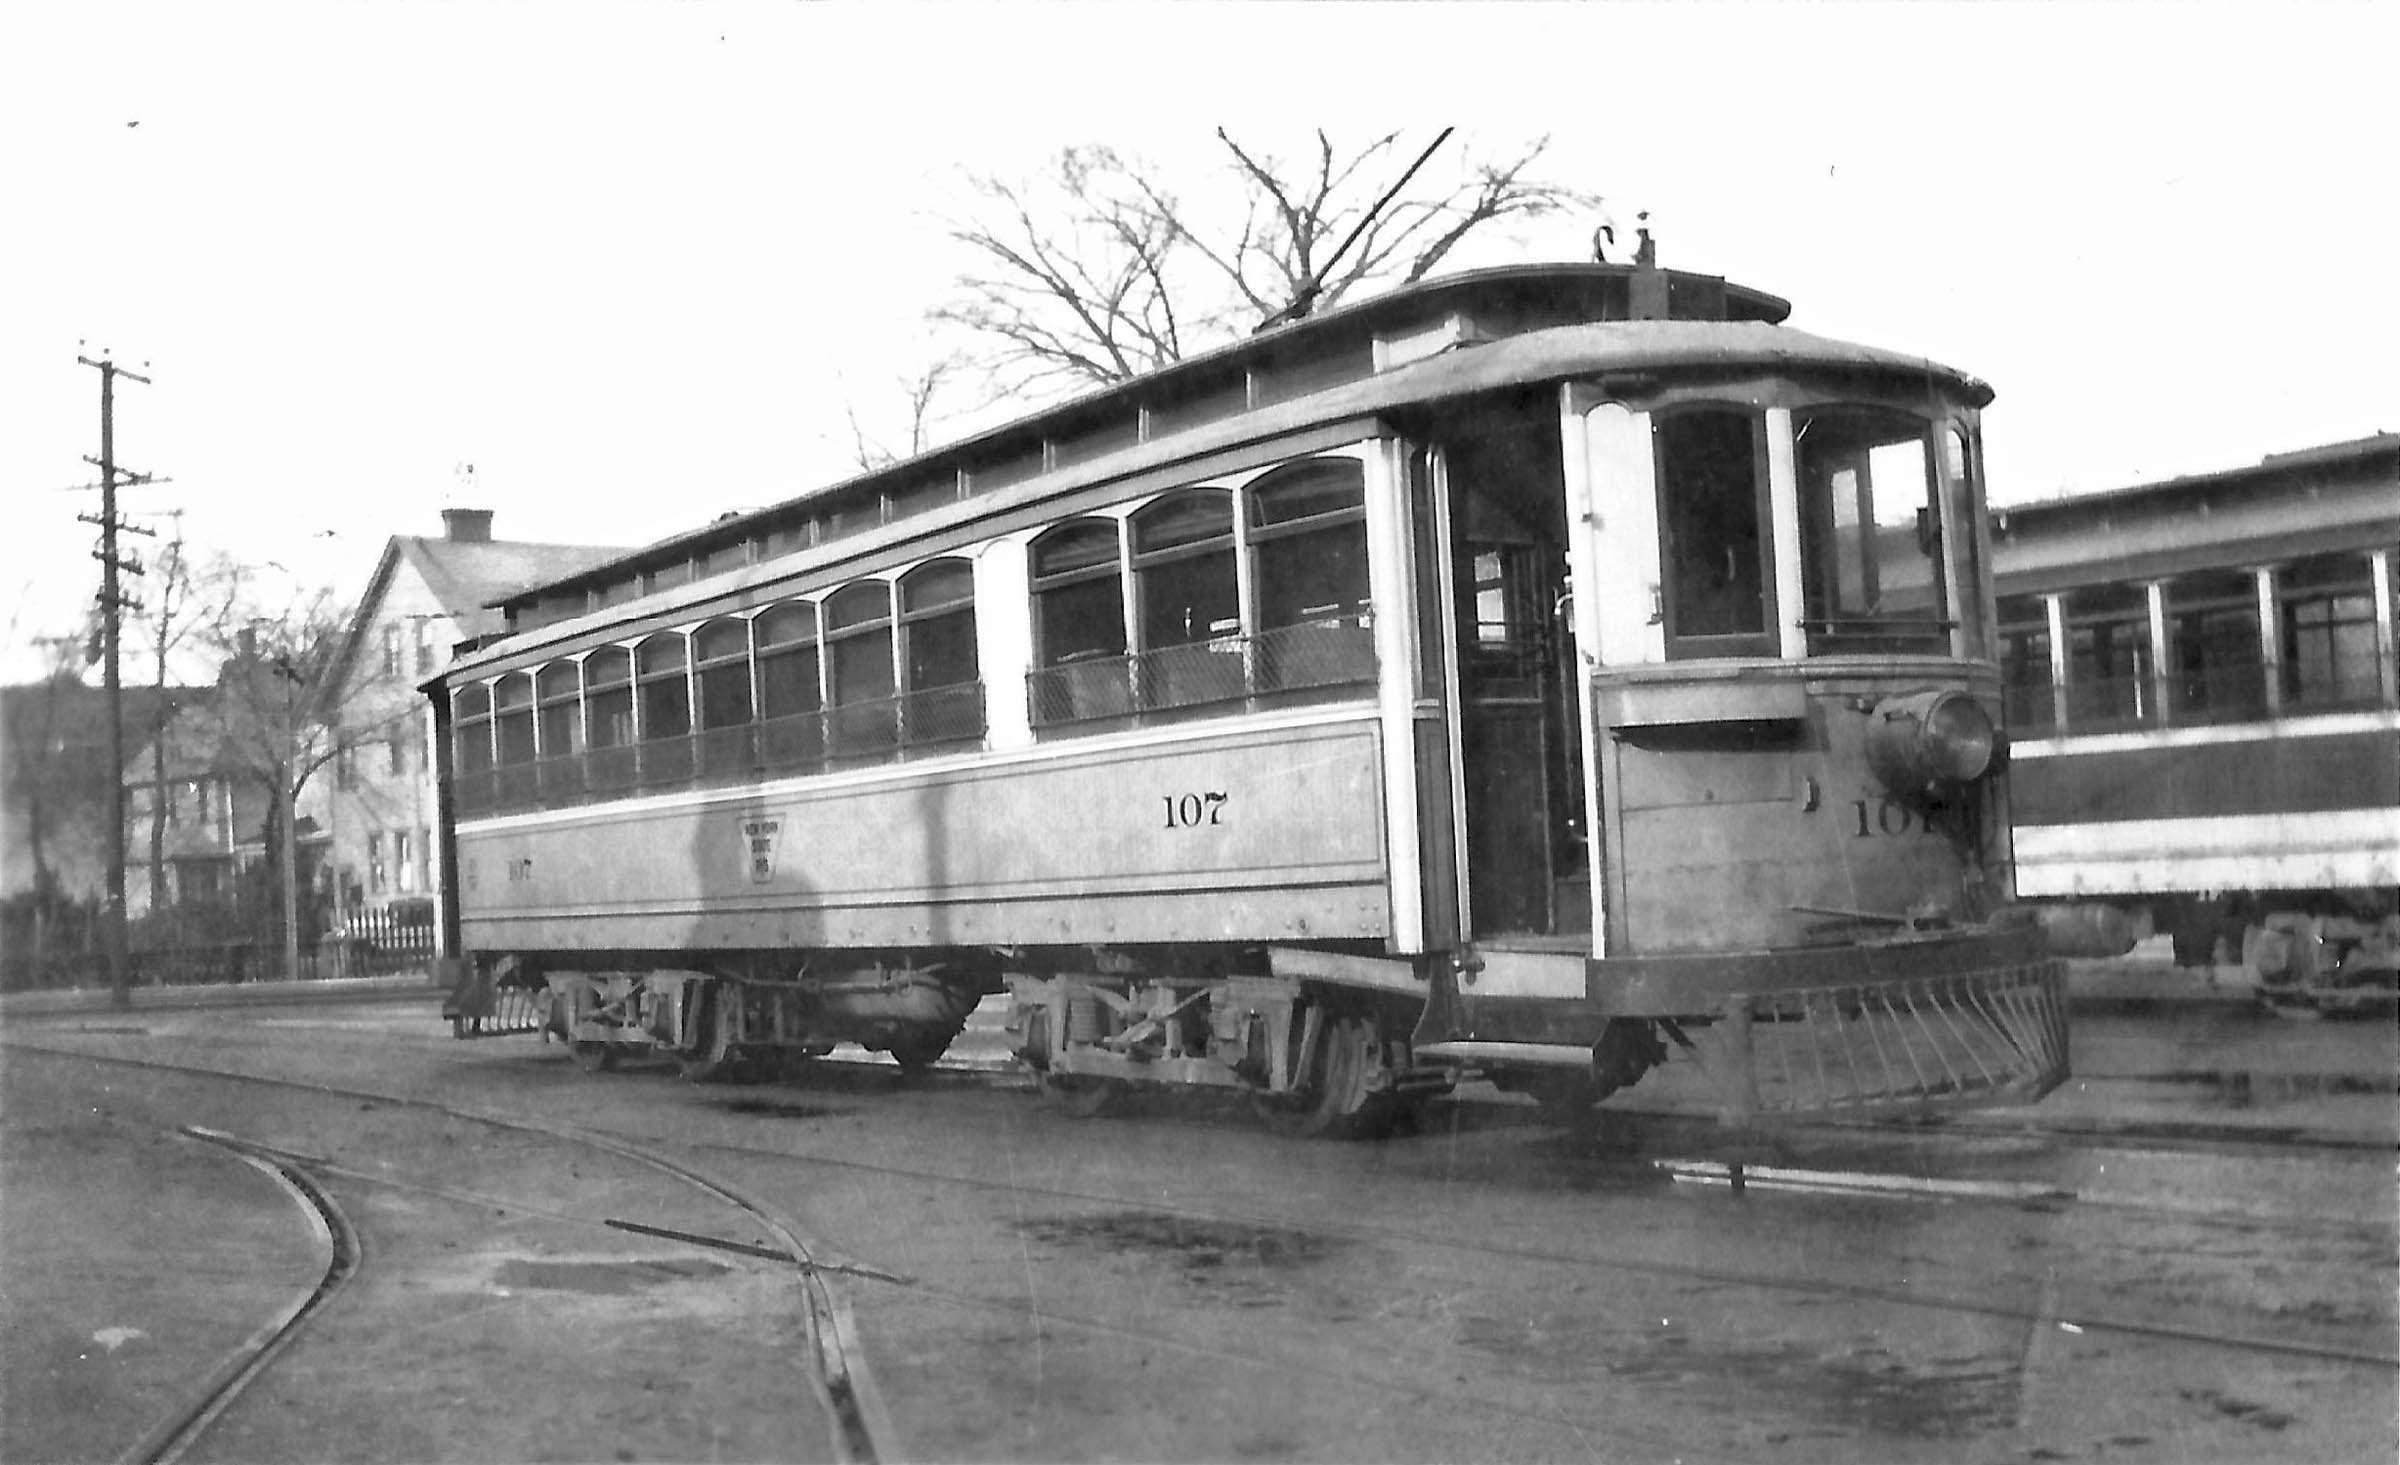 Rochester and Eastern Railway Car #107